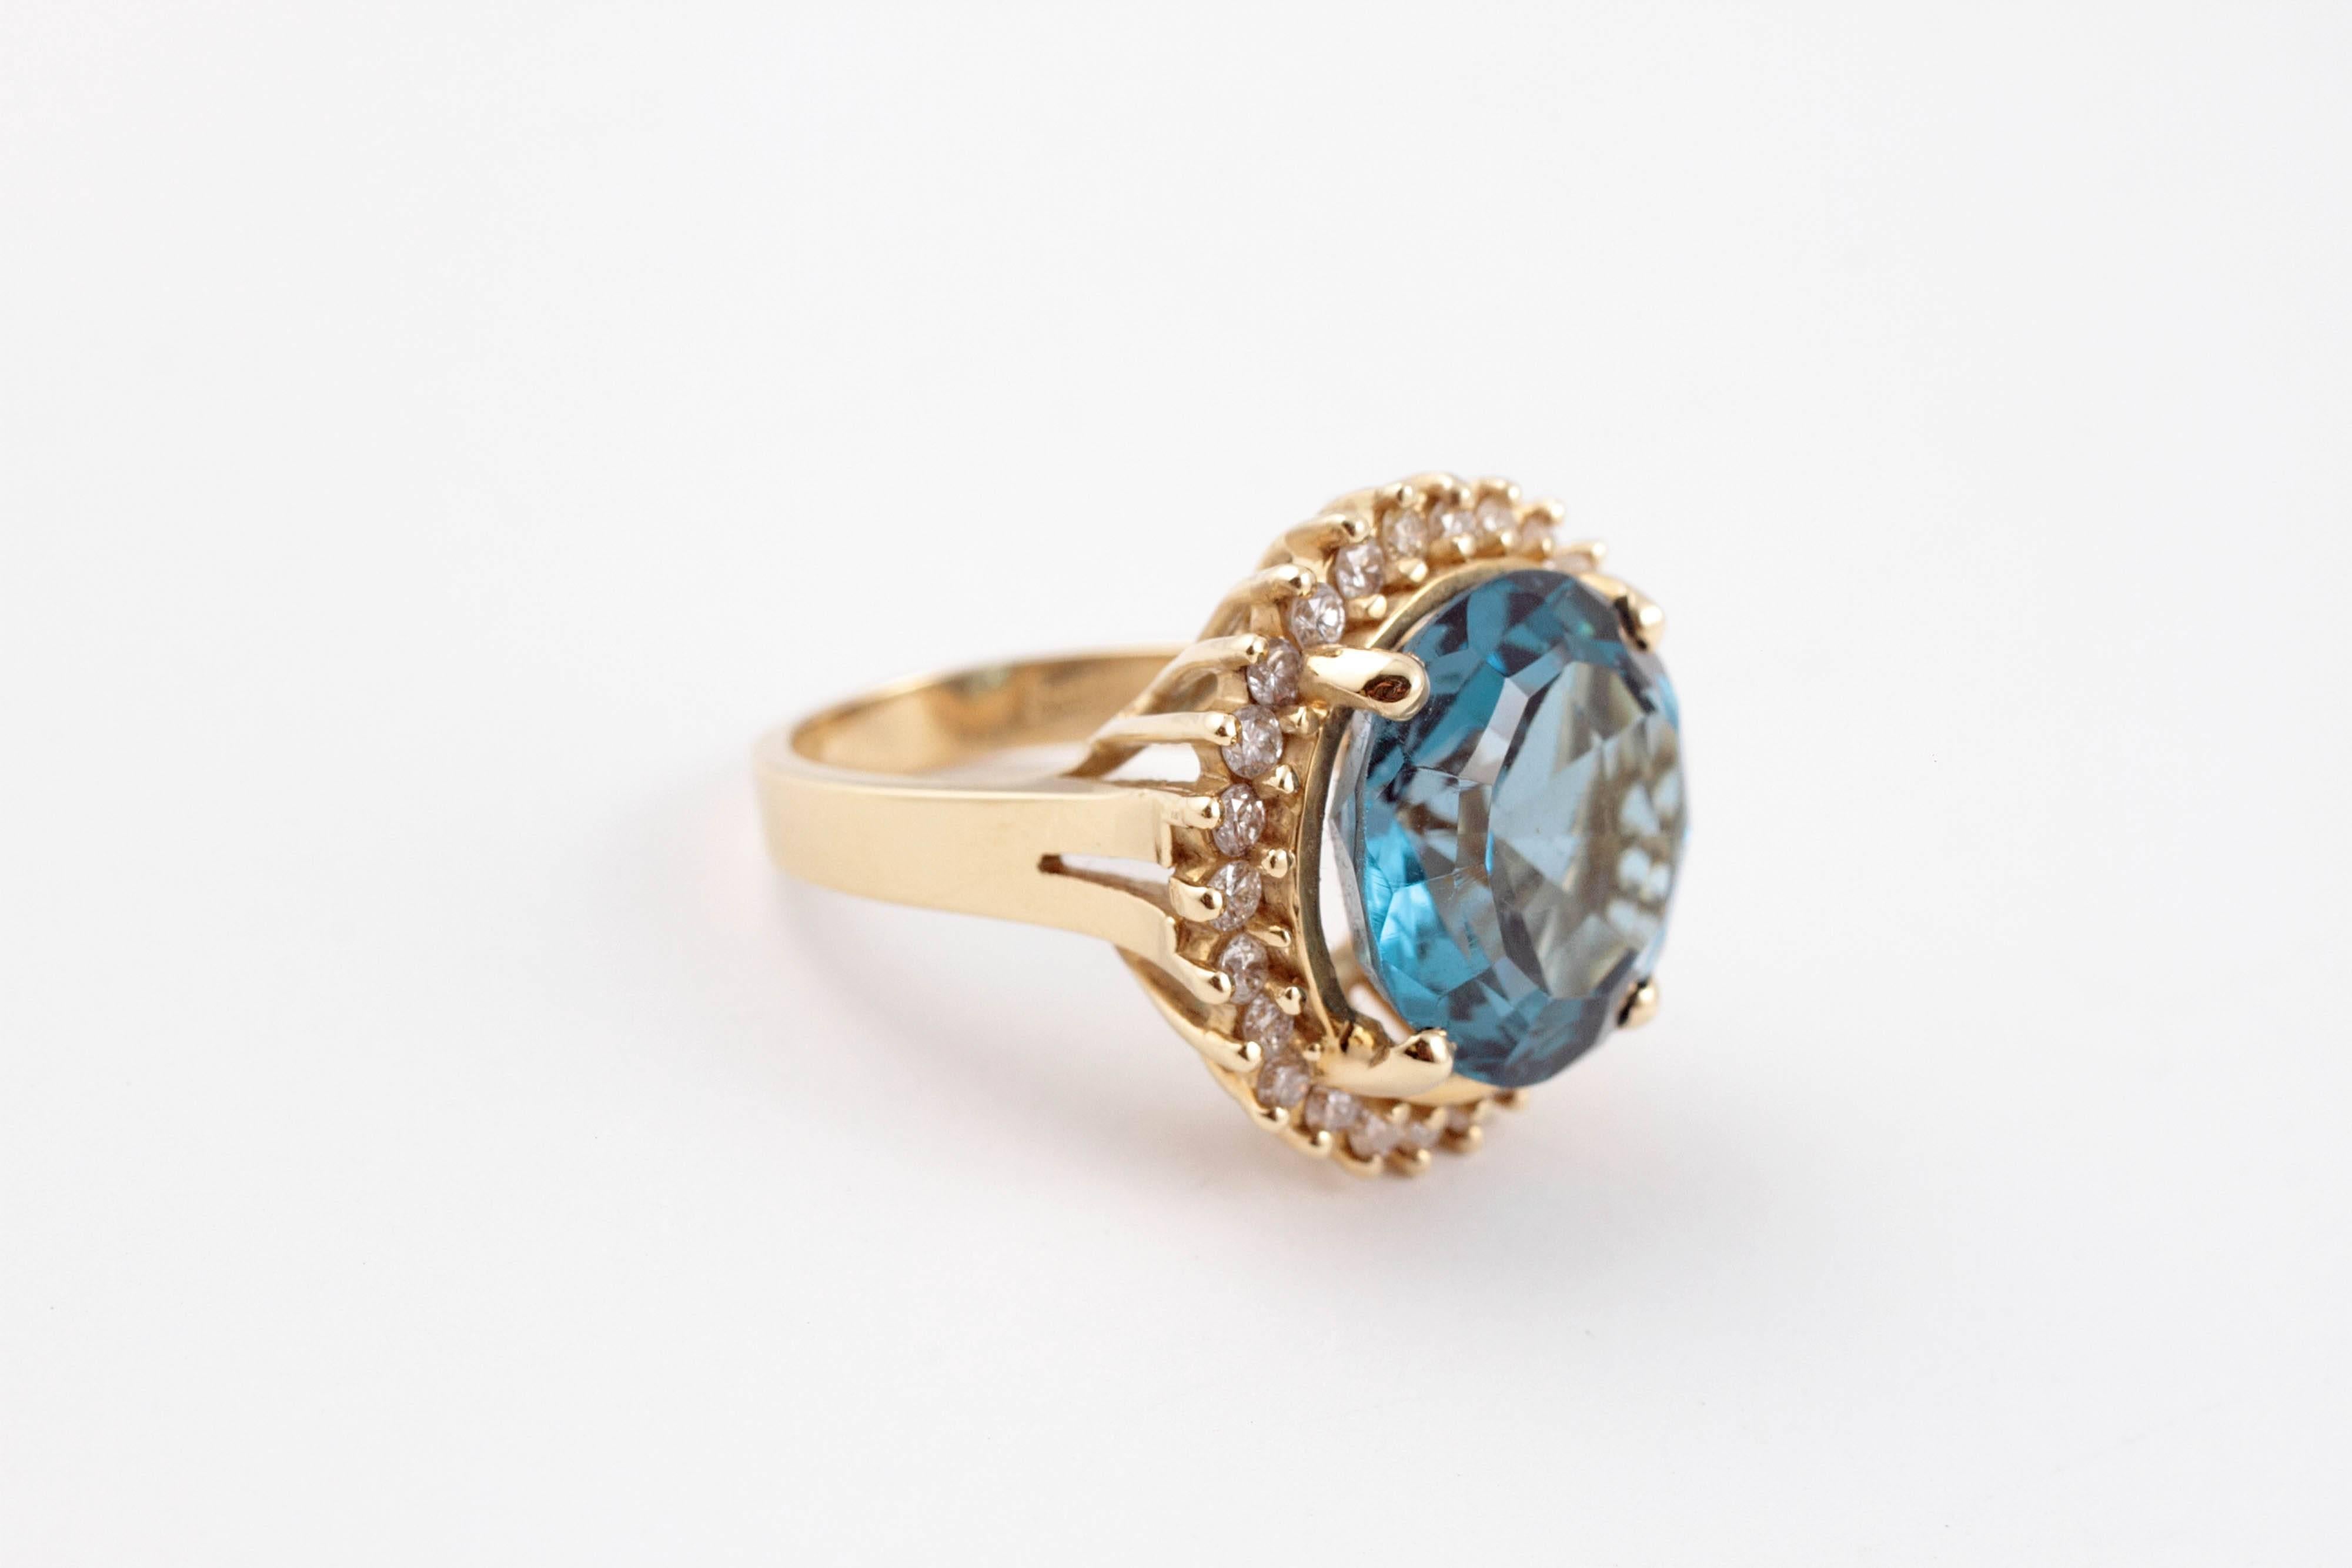 A knockout for sure! In a size 6 1/2, 14 karat yellow gold centered with a 12.00 ct blue topaz, surrounded by 0.75 cts of diamonds.